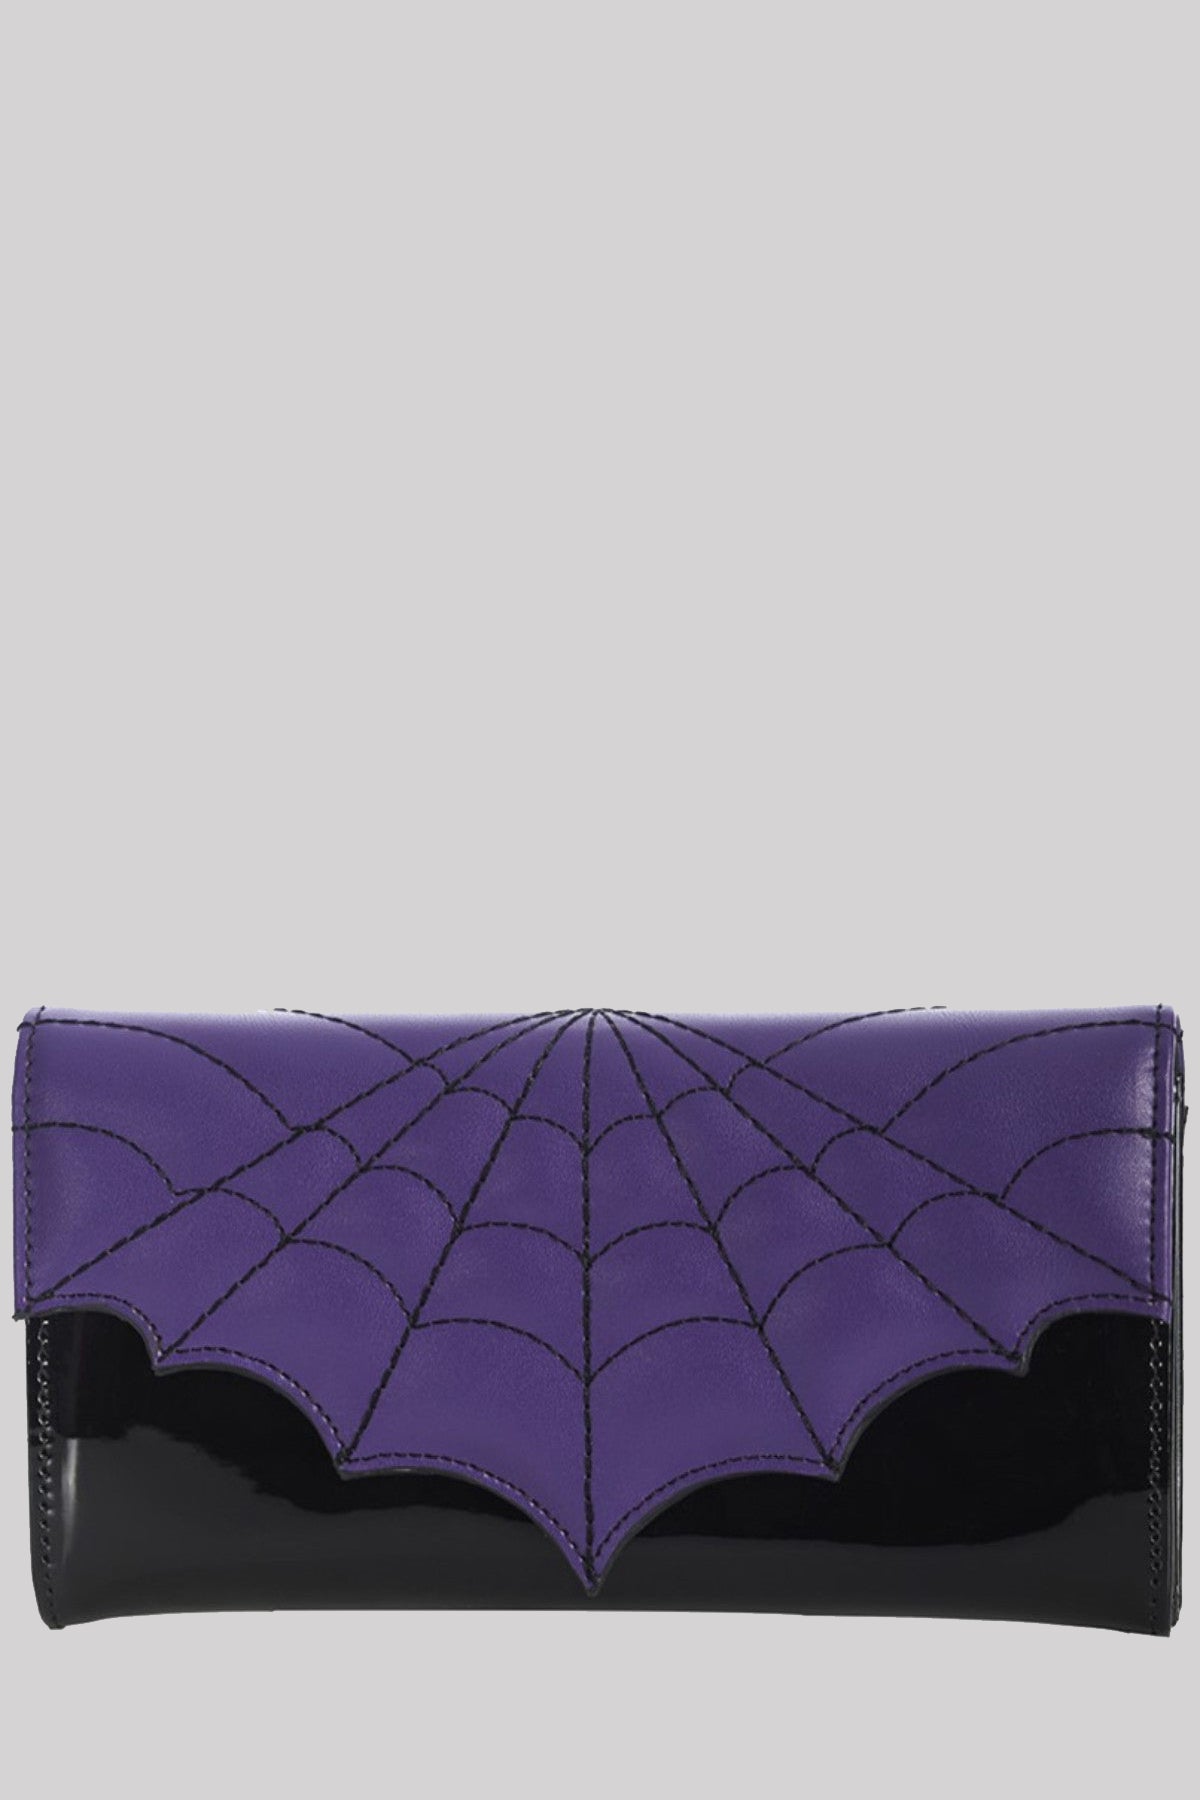 Banned God & Monsters Spider Web Faux Leather Wallet